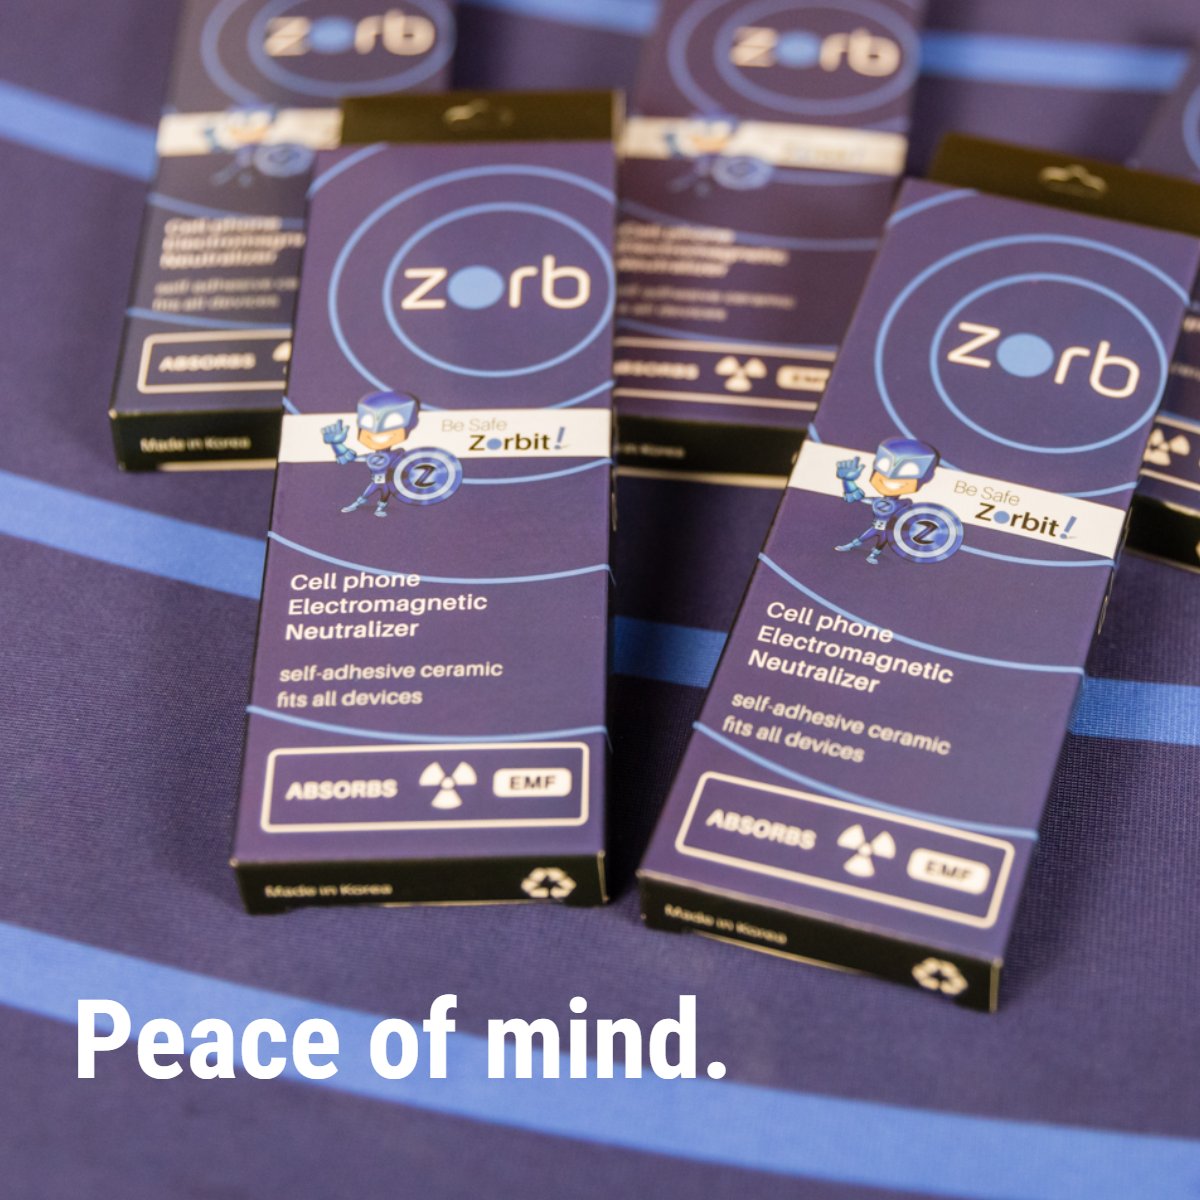 5 Pack - The Zorb - Flagship Product - EMF Protection for all devices. Sale Price $159.95 (retail $199.75)